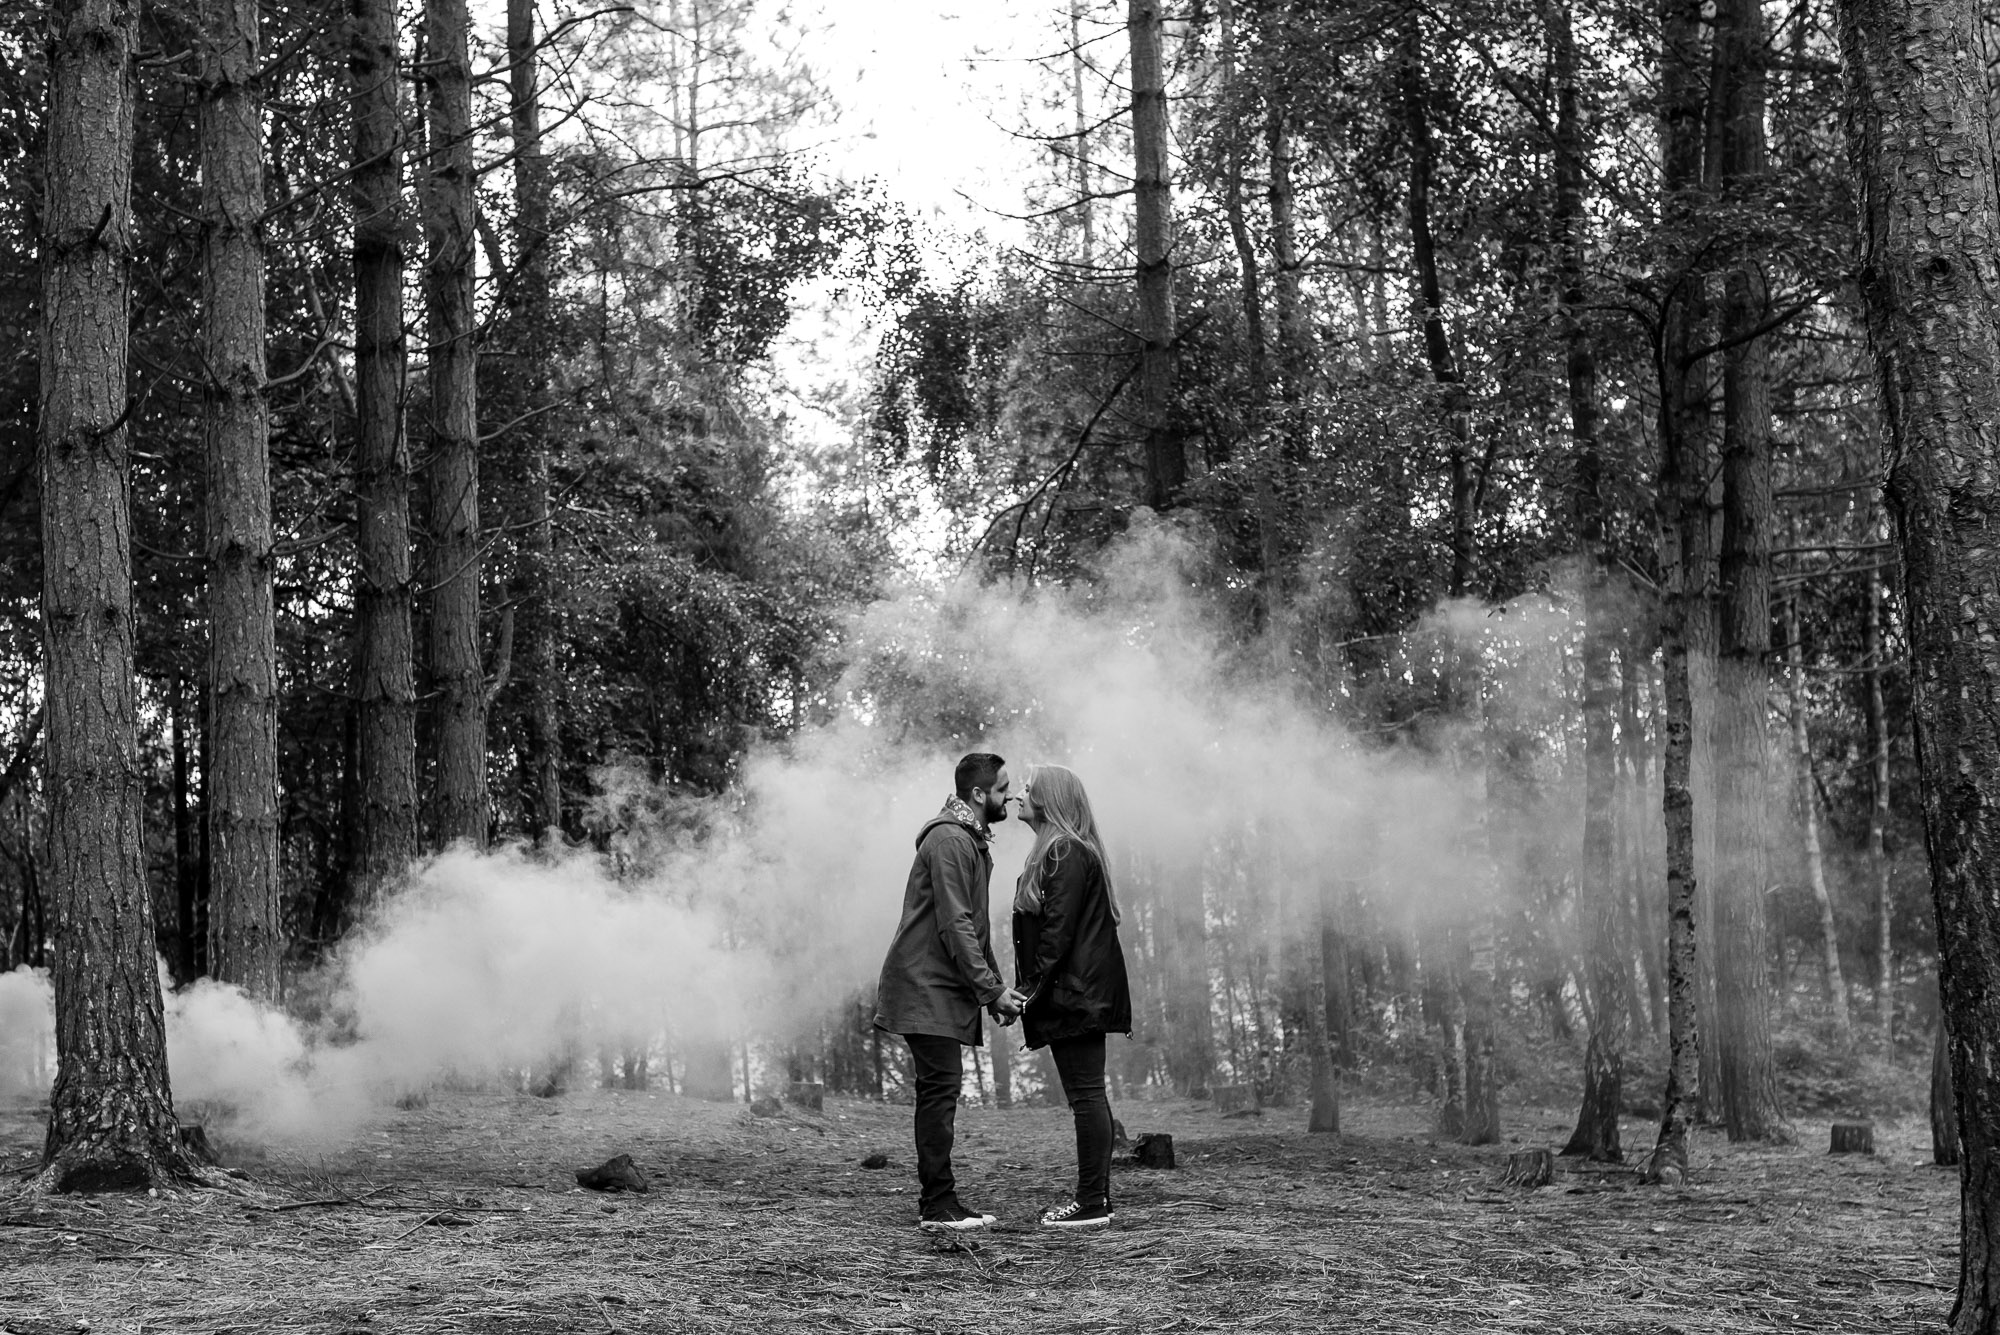 Kissing in front of a smoke grenade 